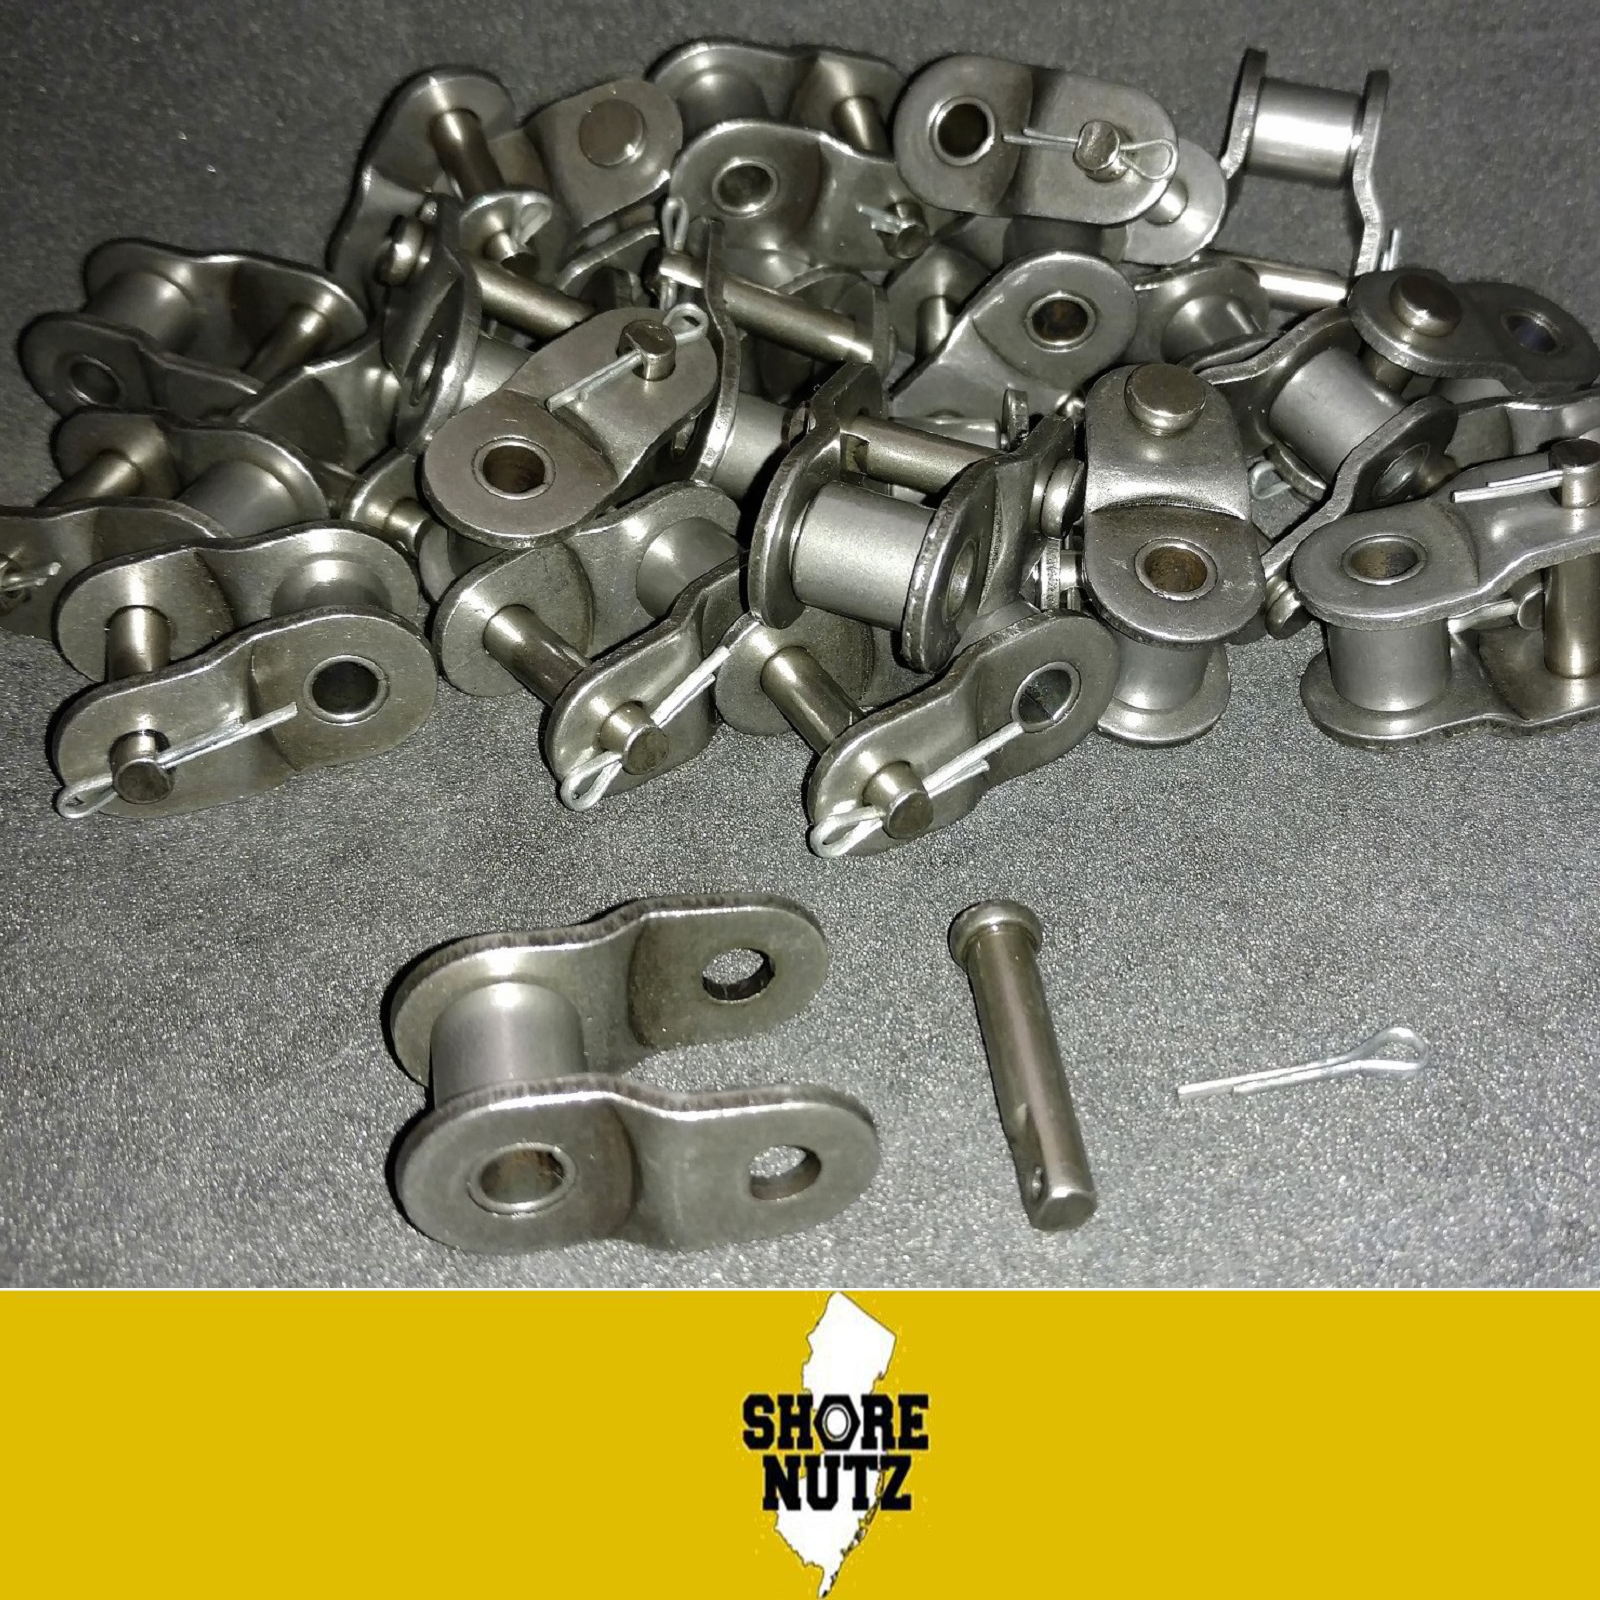 #41 Chain Offset Link Qty 10 Pieces Half Link 1/2" Pitch 41o/l